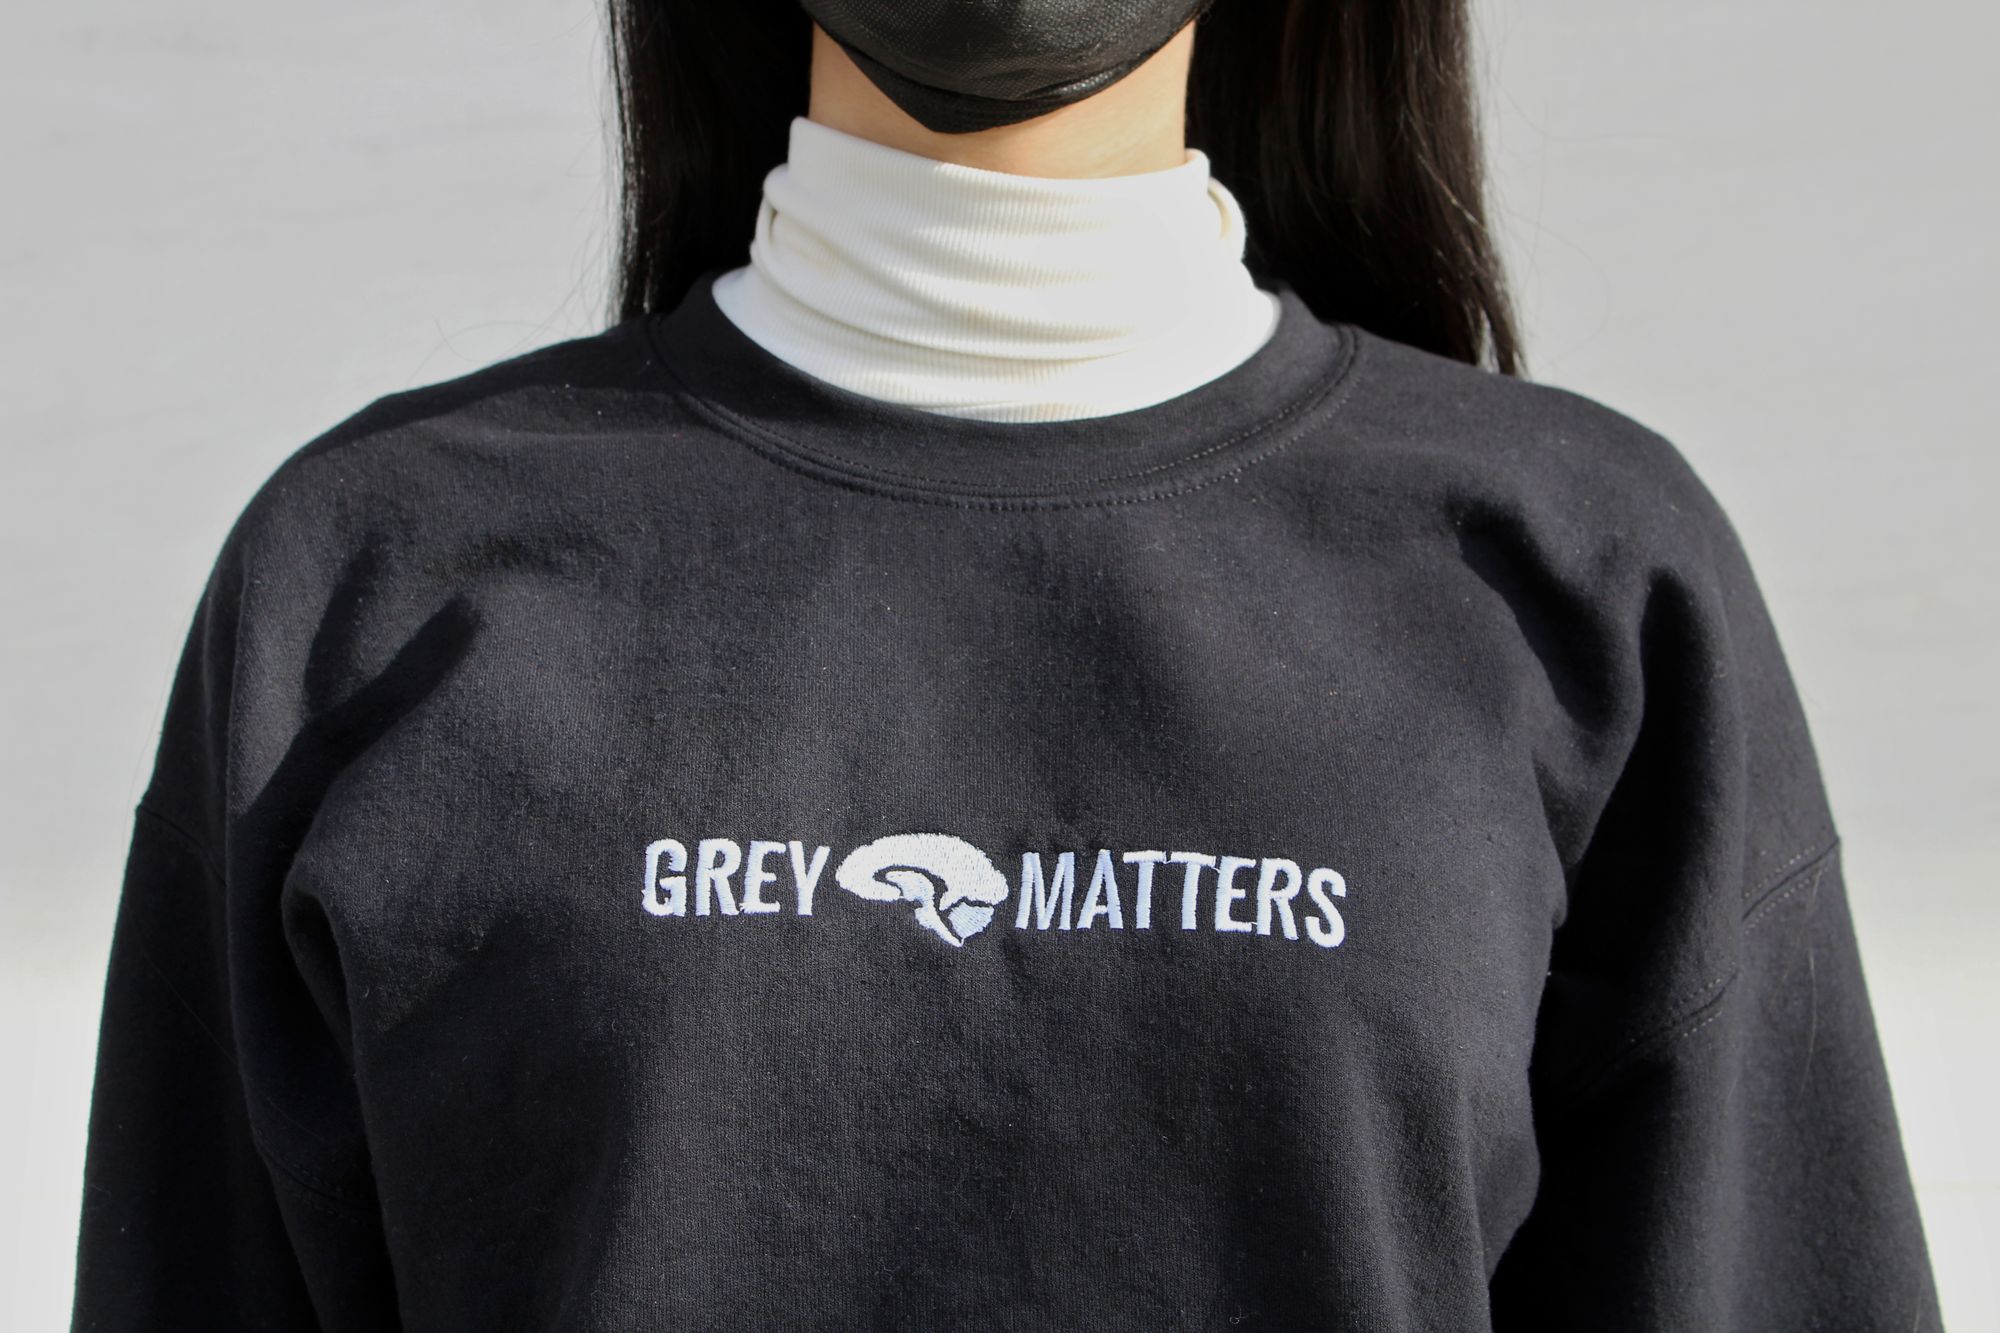 close-up of the Grey Matters logo on the sweatshirt